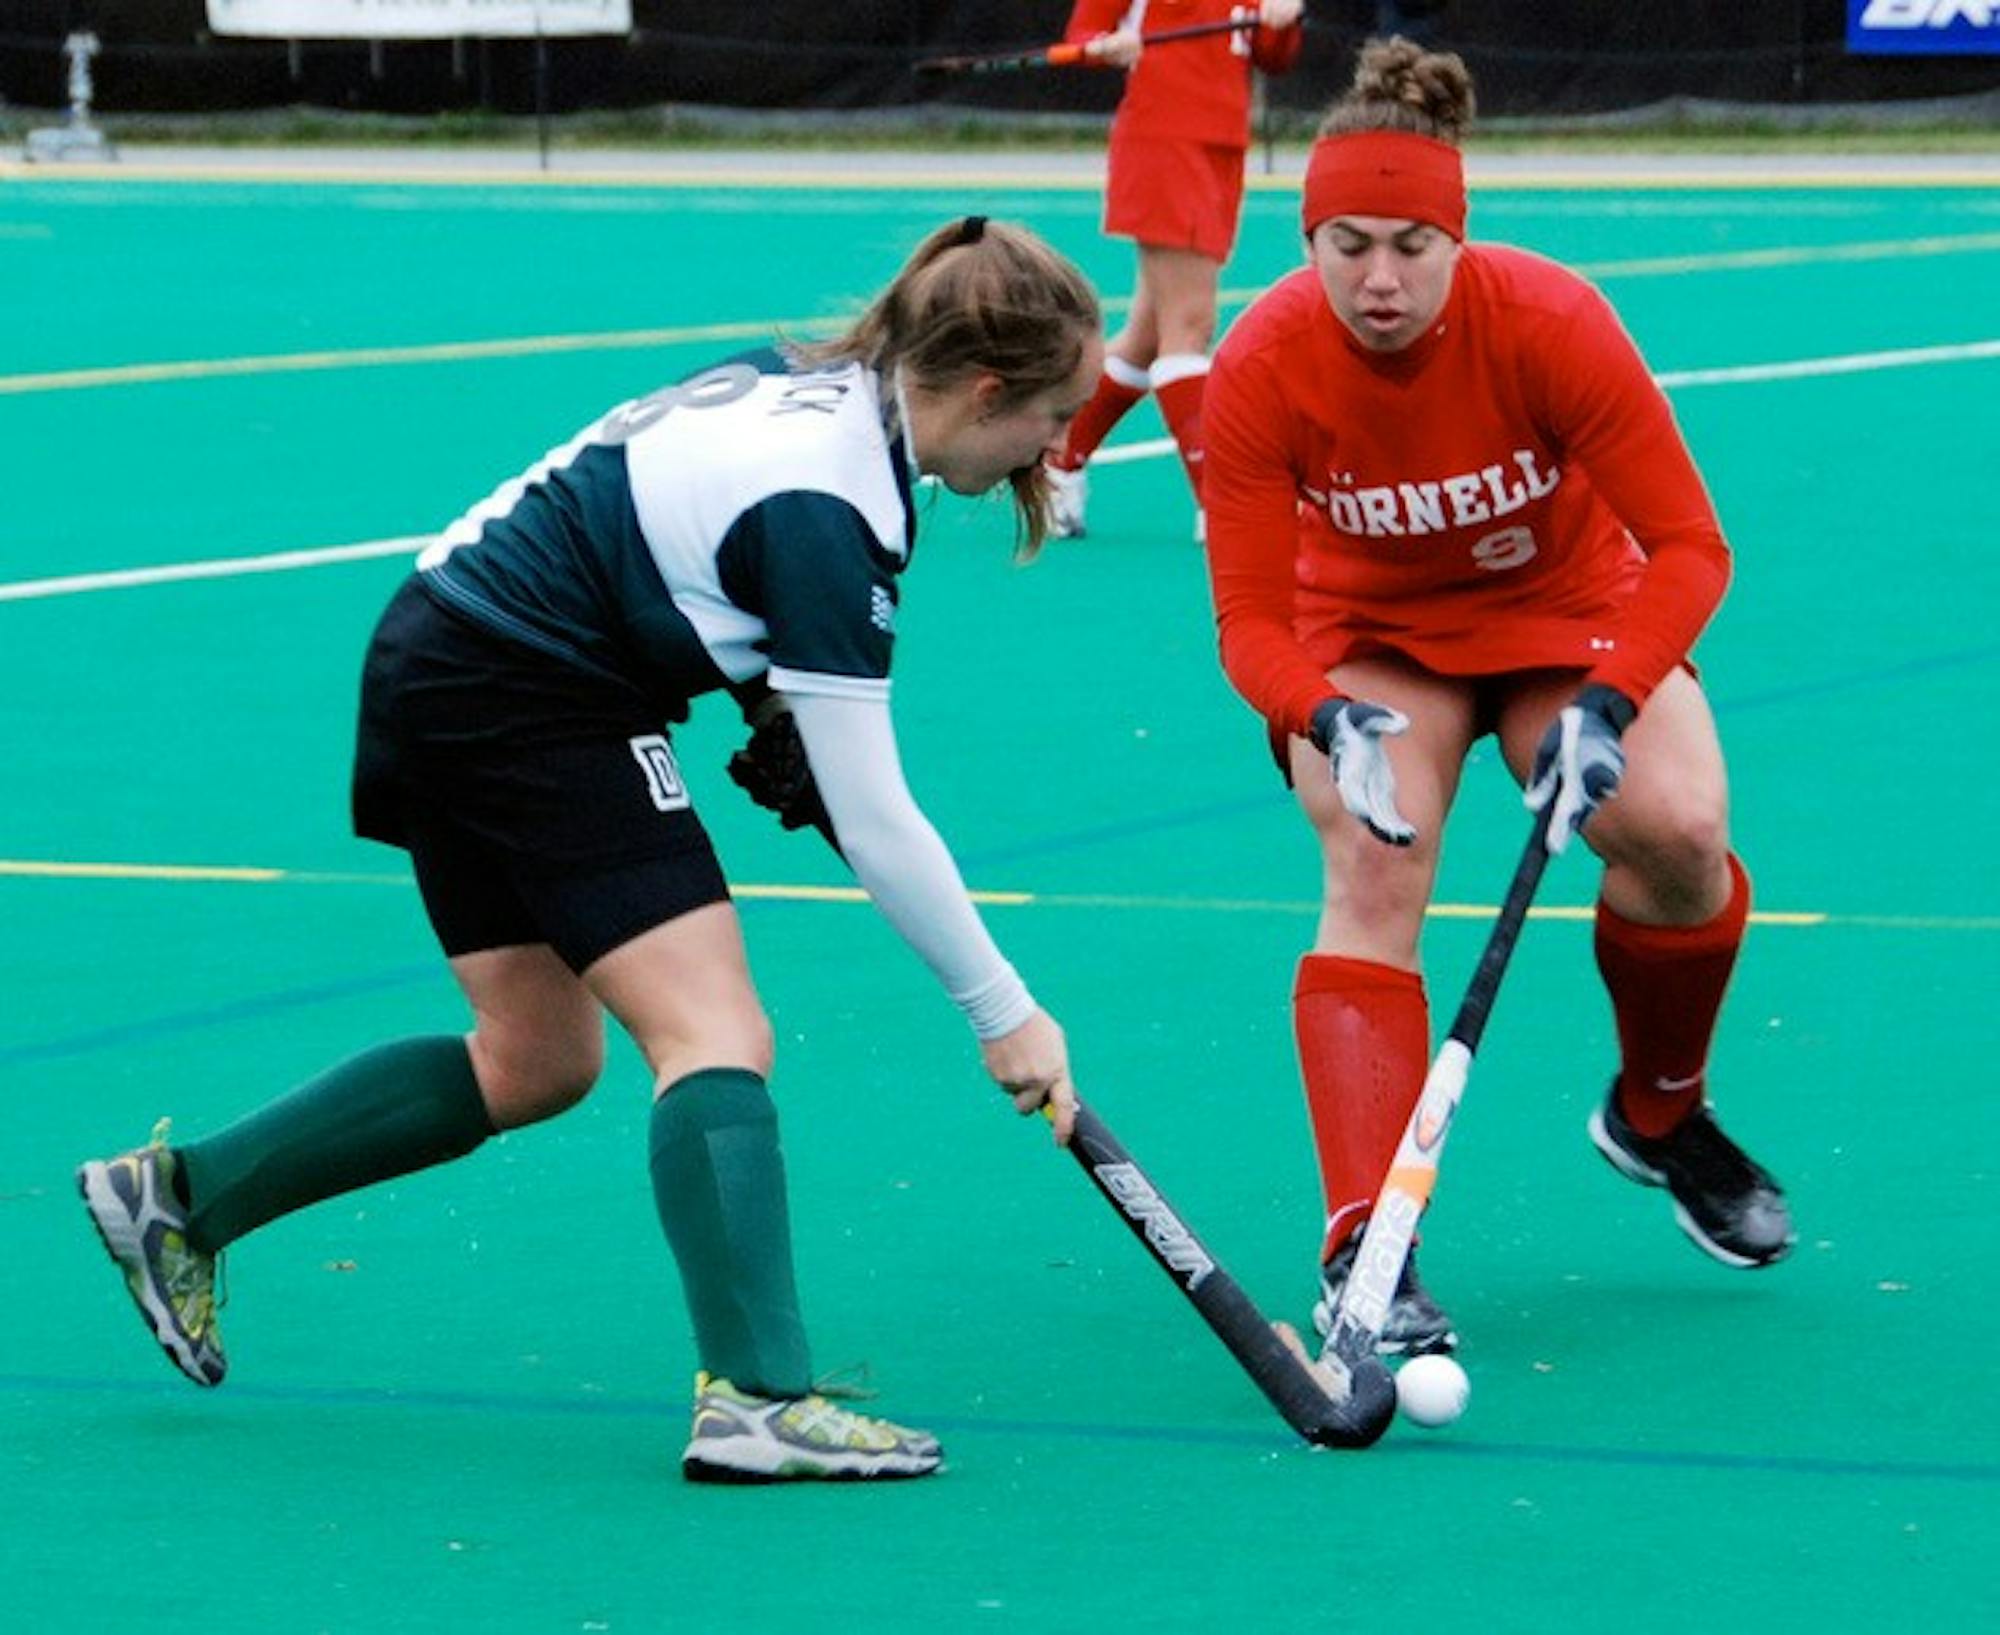 The Big Green field hockey team could not close out its season with a victory, dropping the finale 2-0 to Cornell.